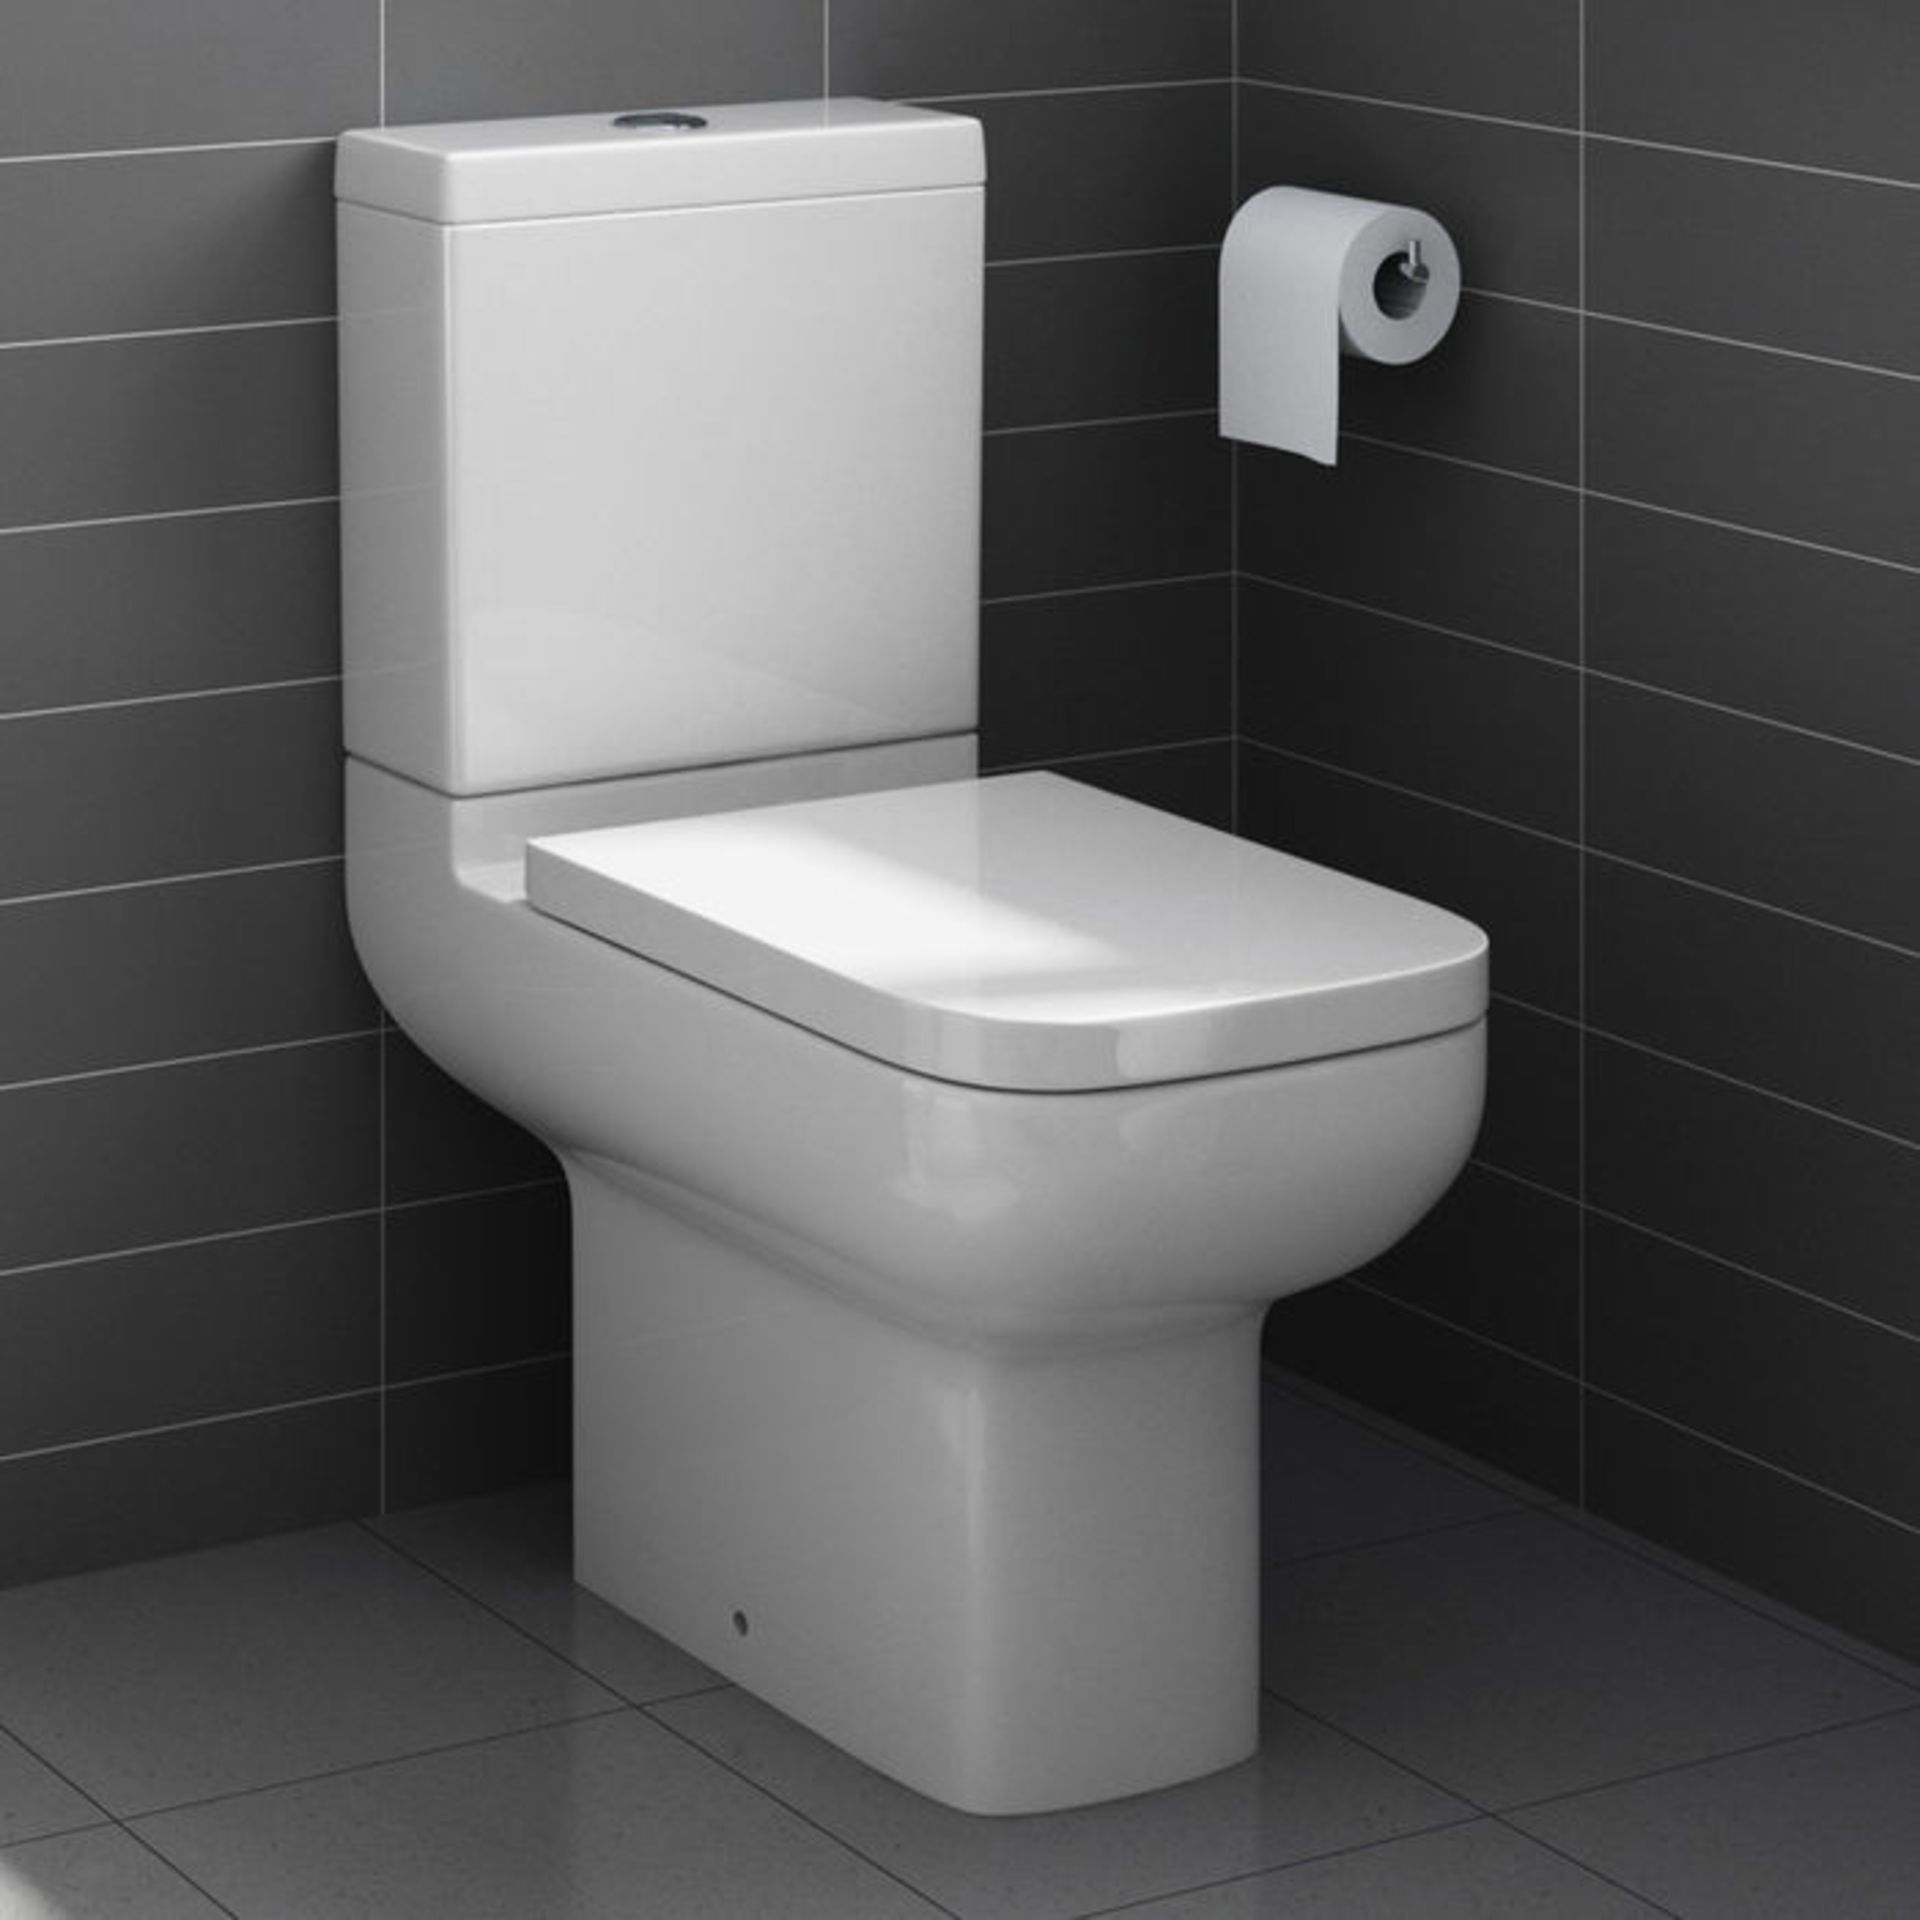 (PA64) Short Projection Close Coupled Toilet & Cistern inc Soft Close Seat. We love this because the